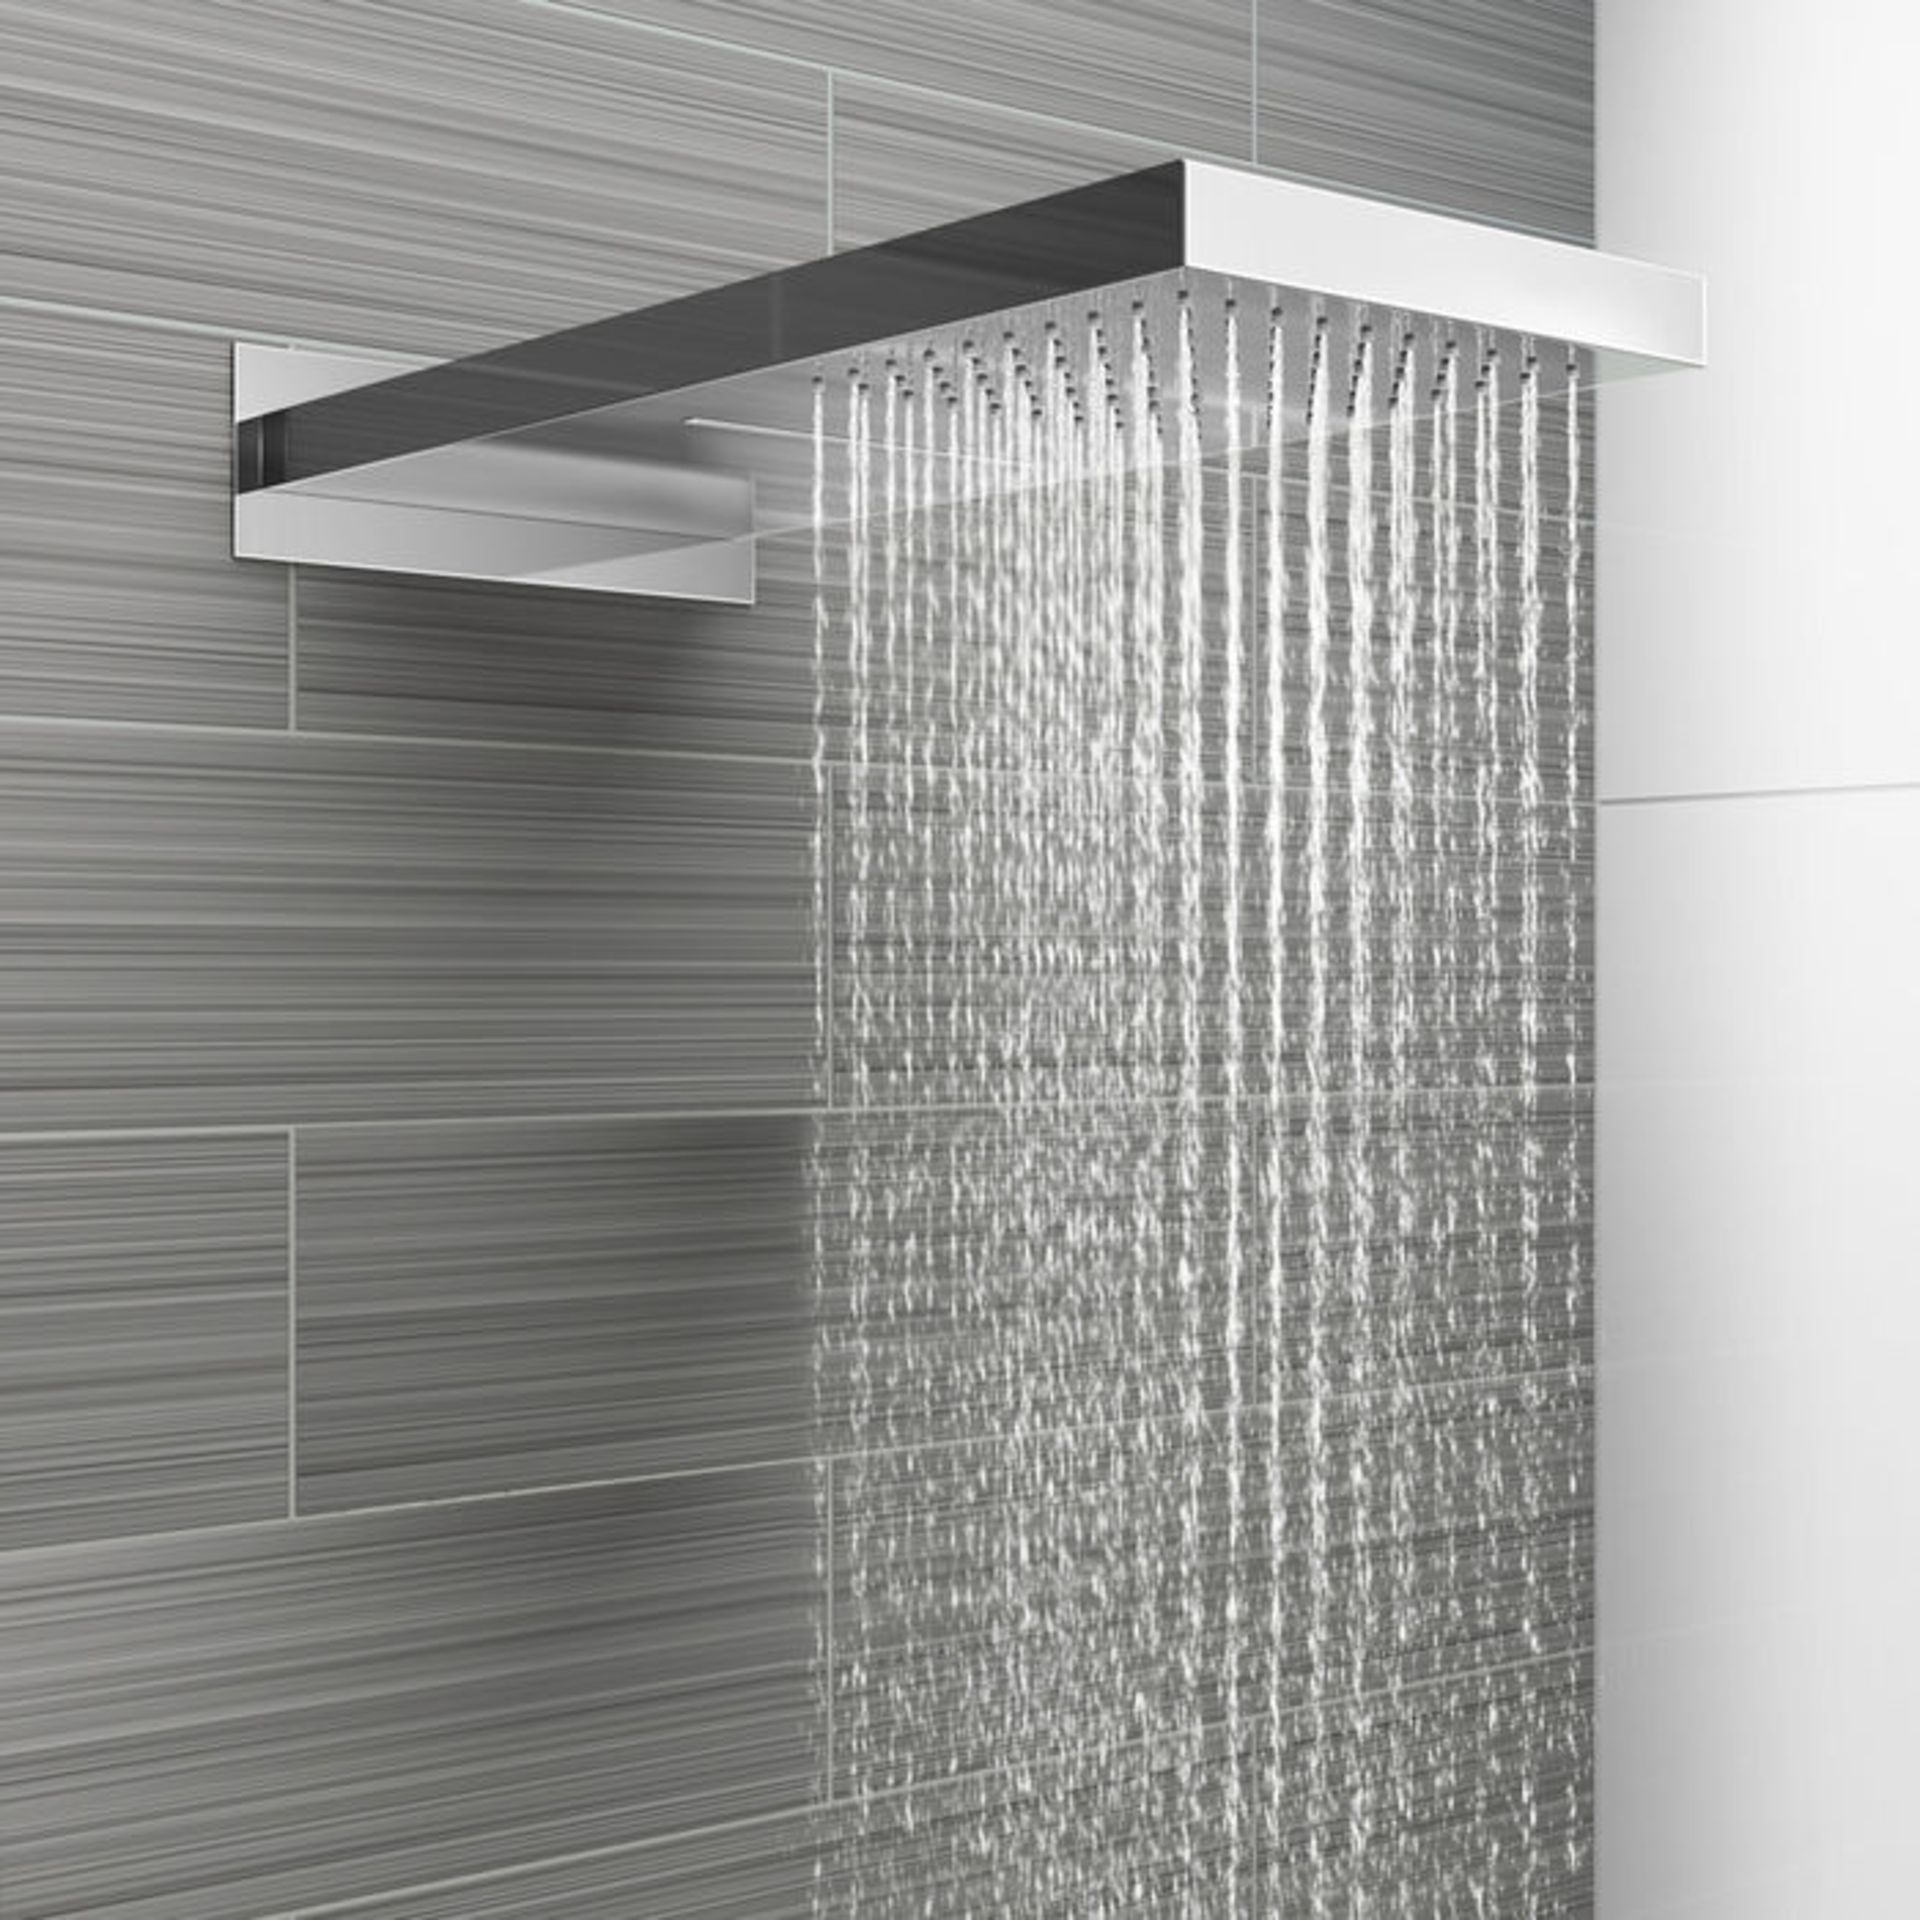 (KL35) Stainless Steel 230x500mm Waterfall Shower Head. RRP £374.98. Dual function waterfall and - Image 3 of 6